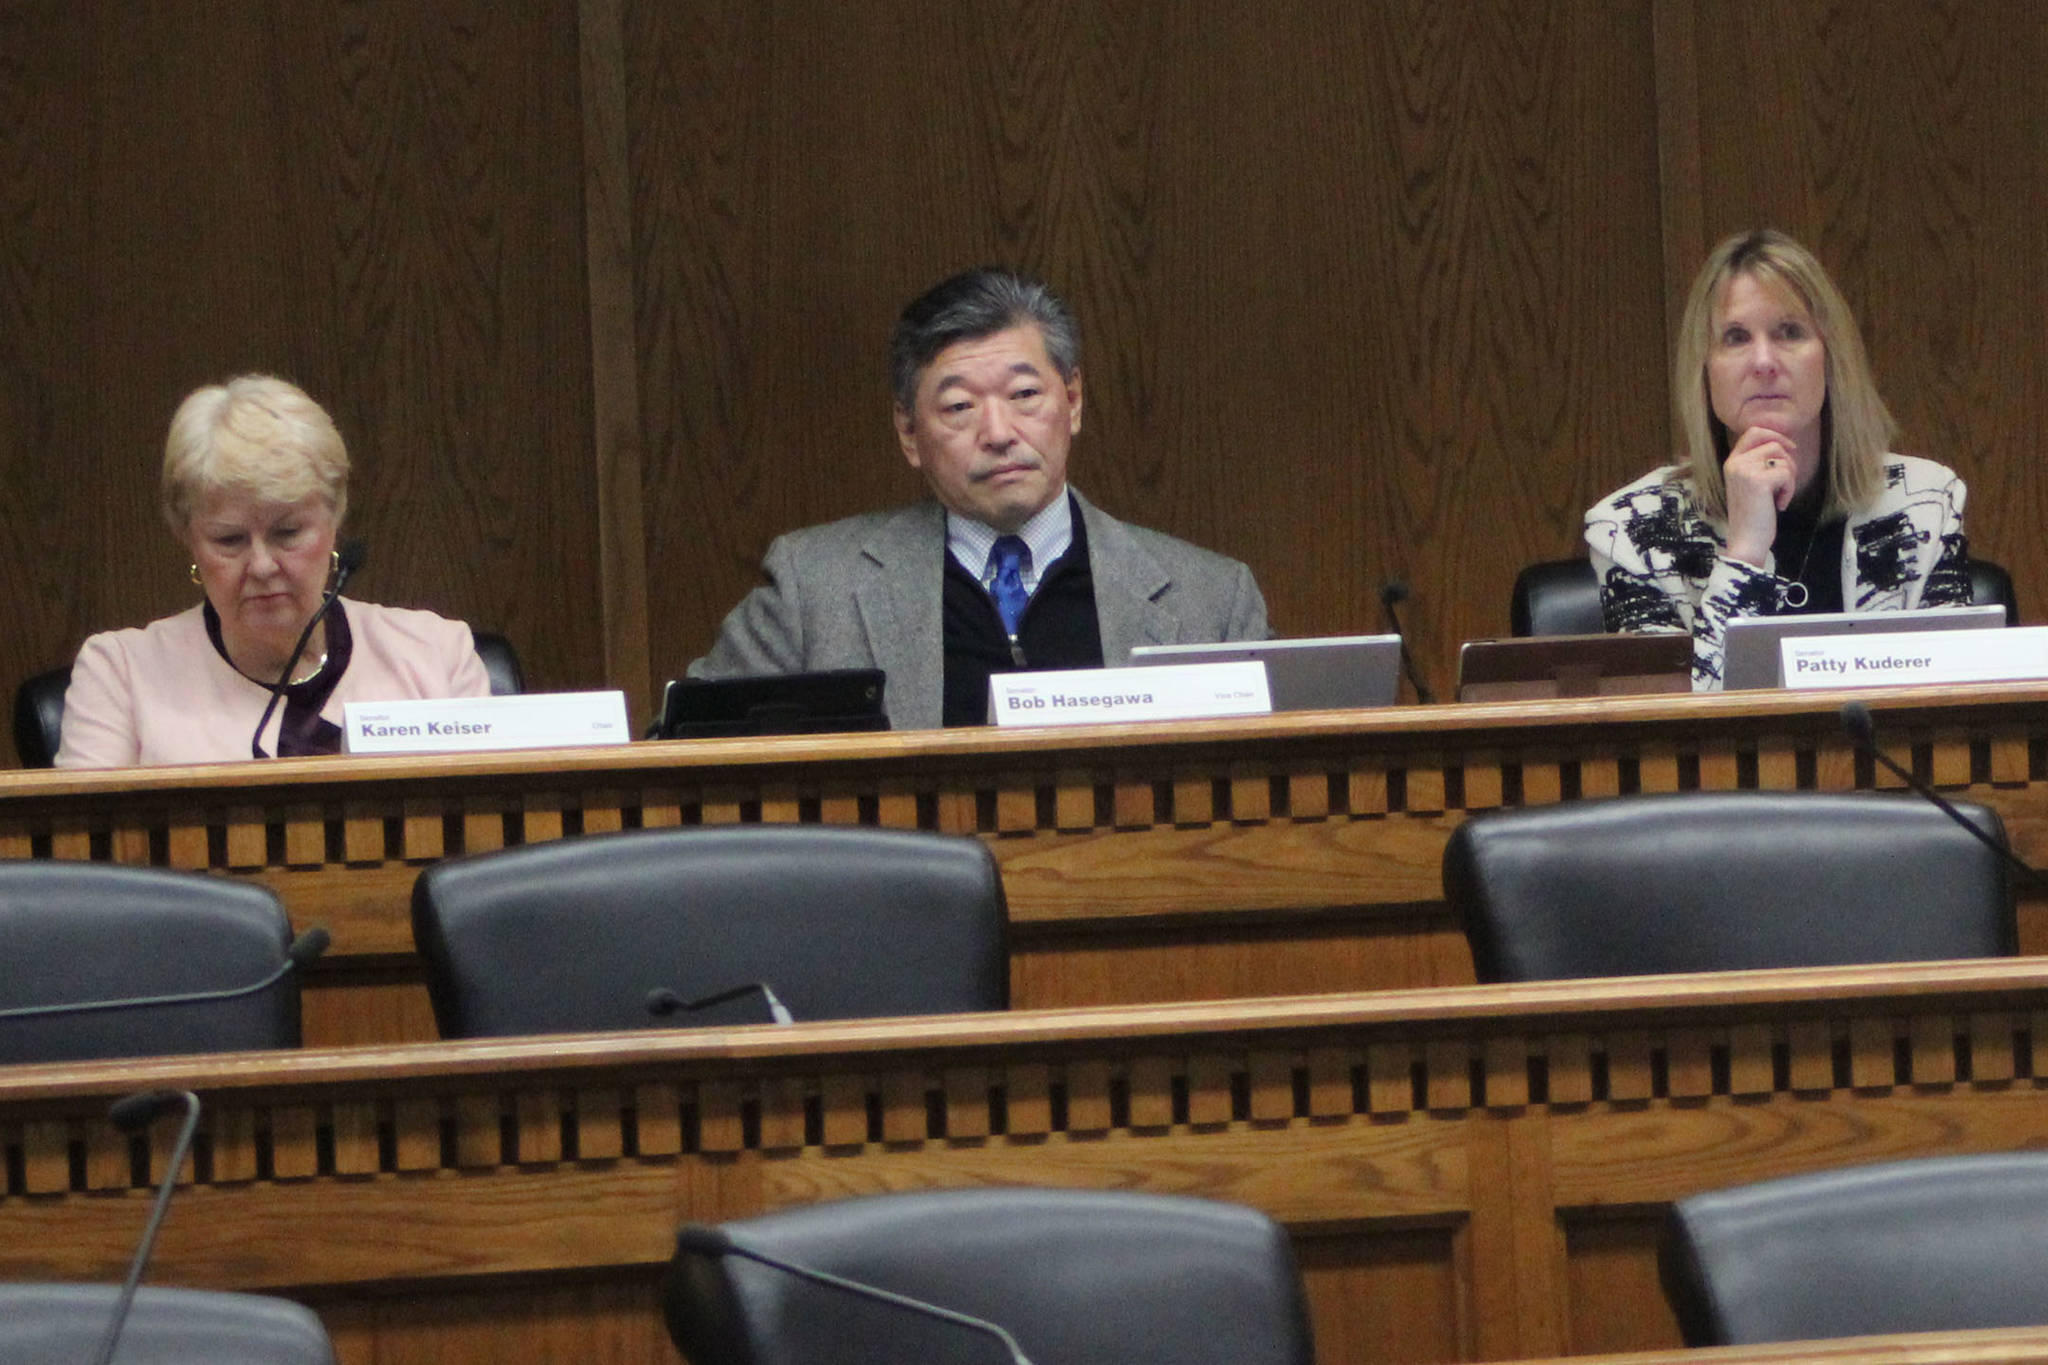 Senate Labor and Commerce Committee members Senators Karen Keiser, D-Kent; Bob Hasegawa, D-Beacon Hill; and Patty Kuderer, D-Bellevue. Photo by Taylor McAvoy